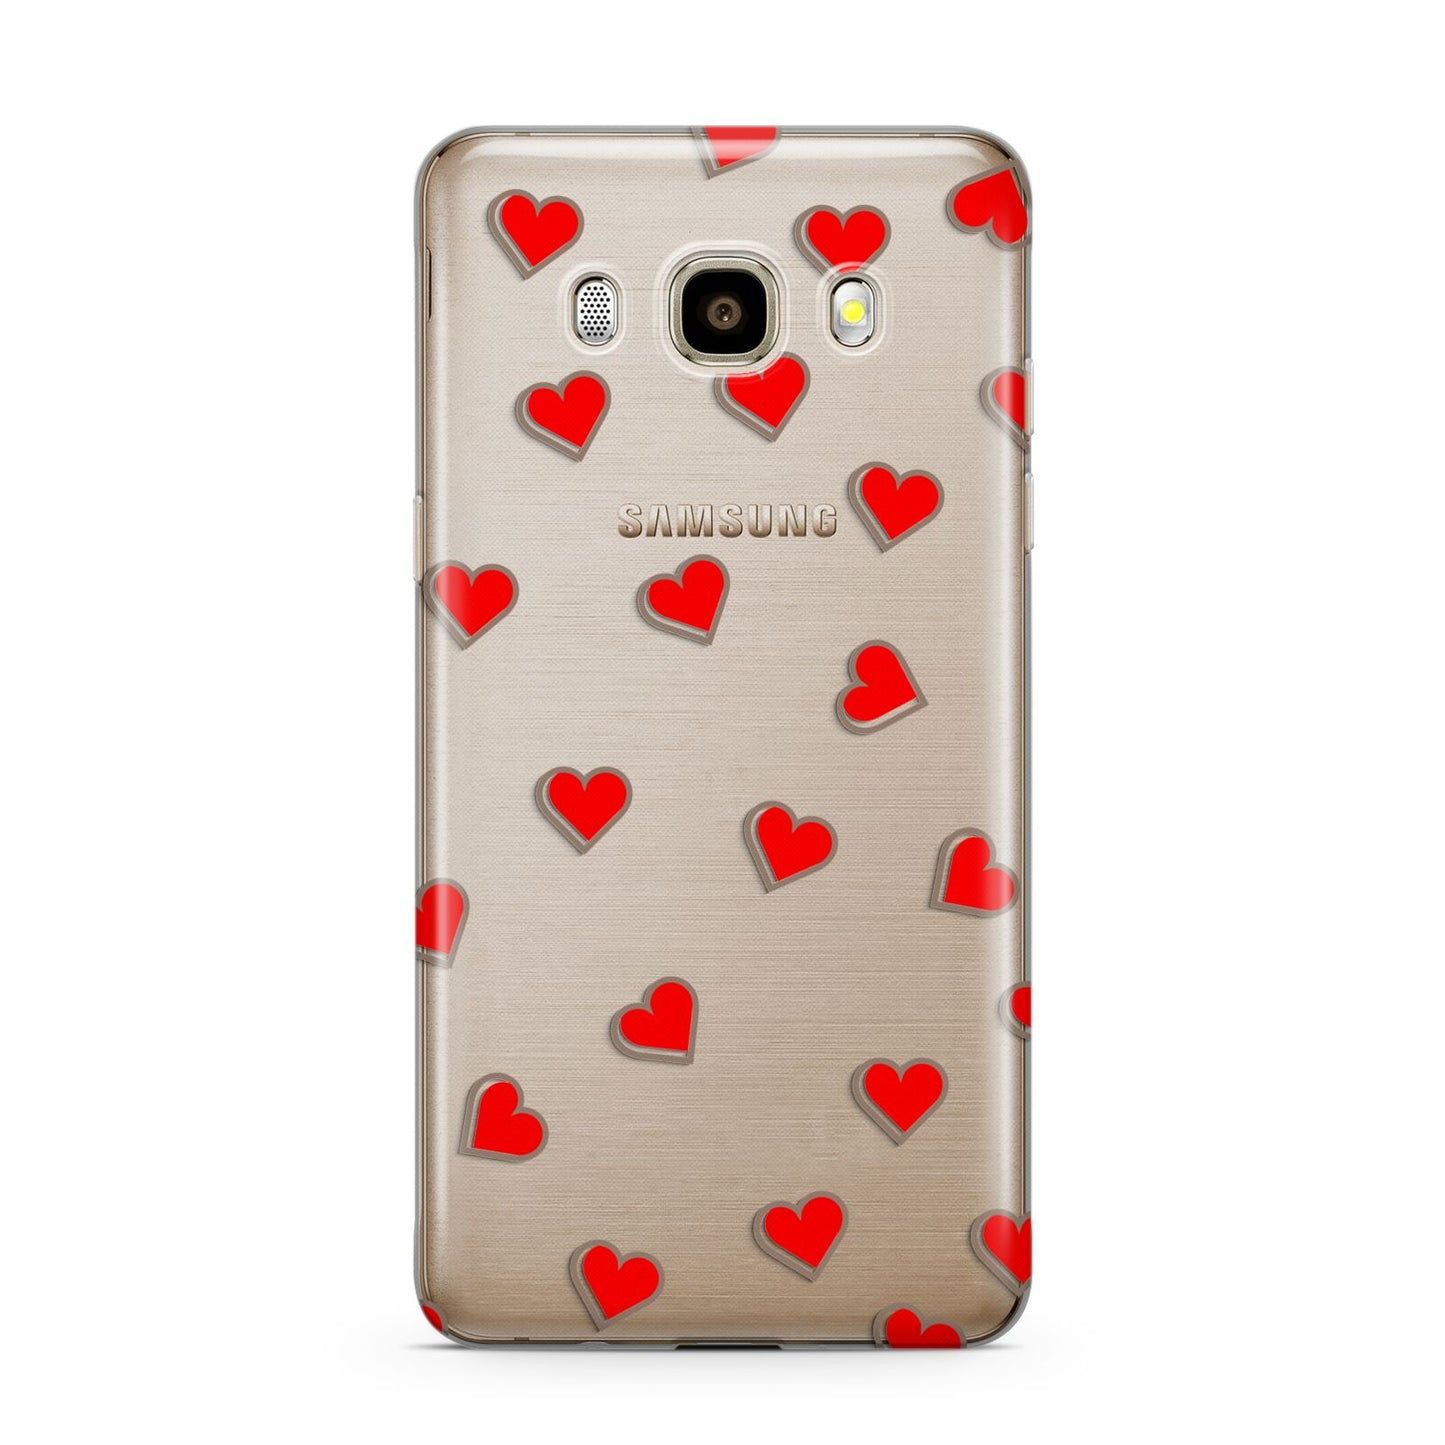 Cute Red Hearts Samsung Galaxy J7 2016 Case on gold phone